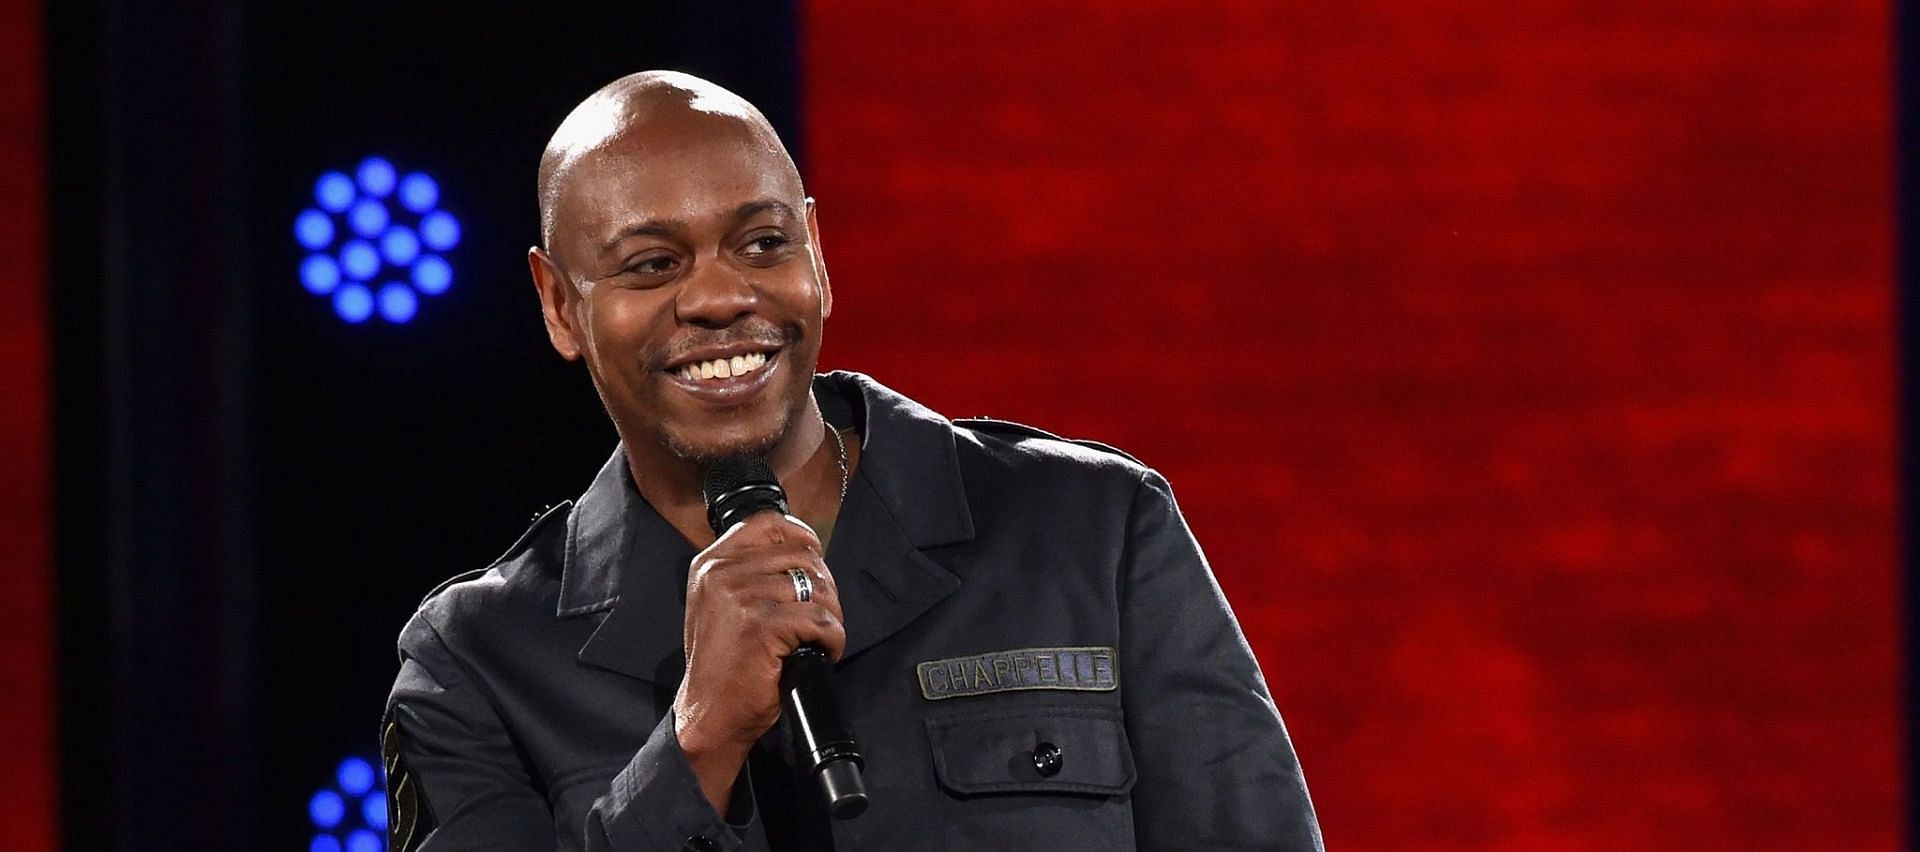 Dave Chappelle recently opposed an affordable housing project in his hometown of Yellow Springs (Image via Lester Cohen/WireImage)